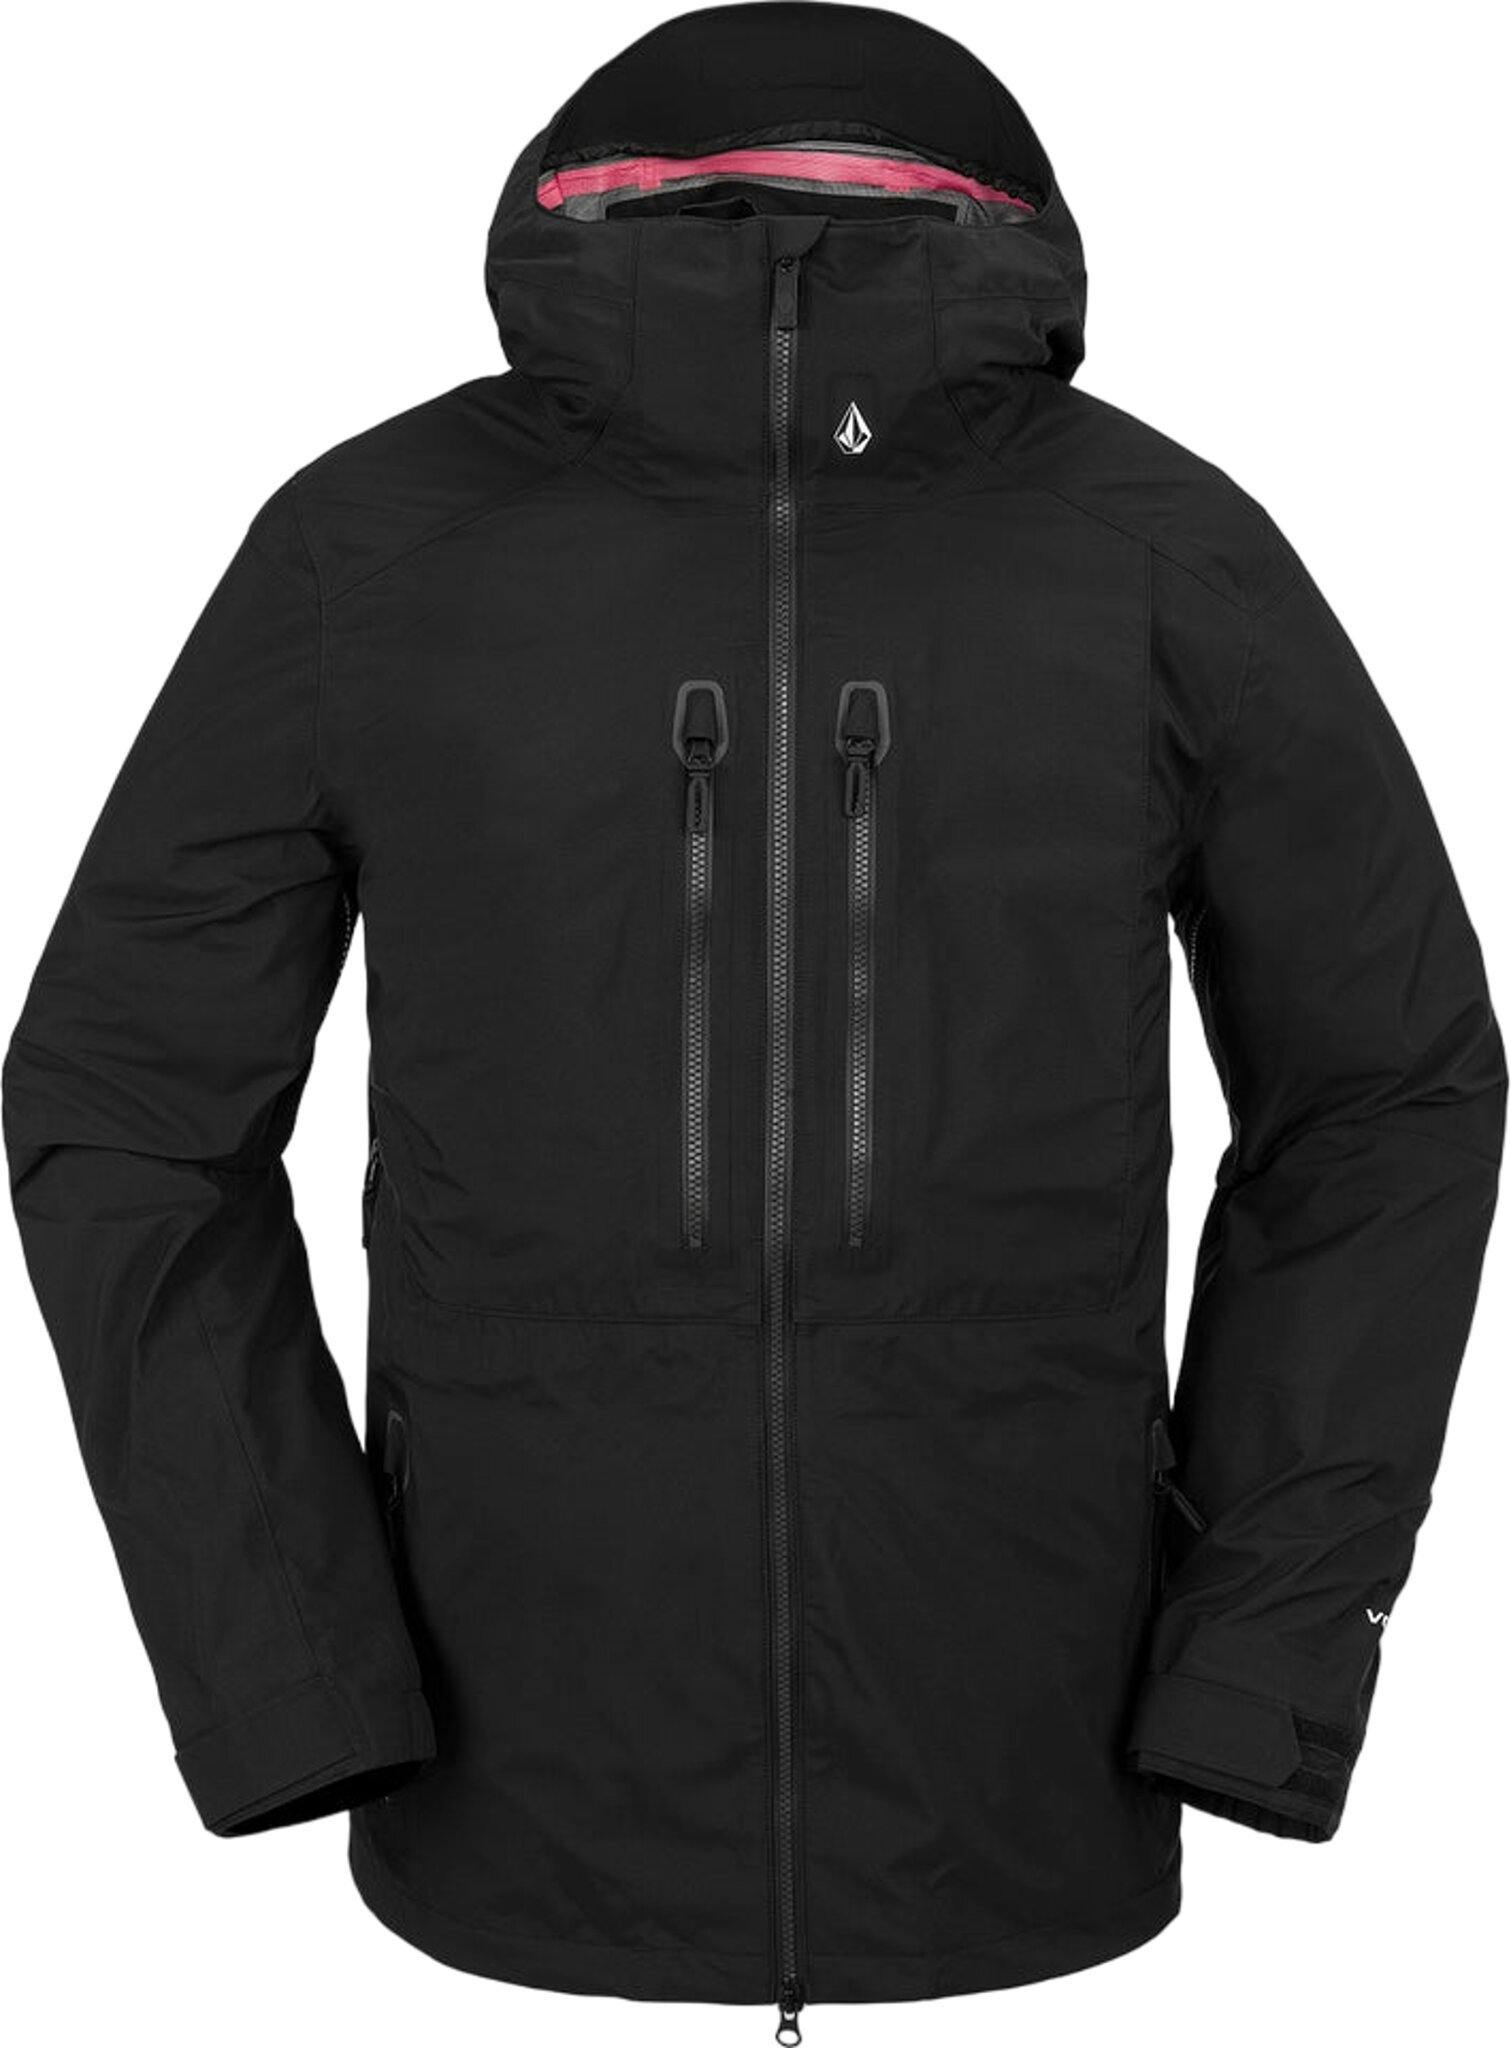 Product image for Guide Gore-Tex Jacket - Men's